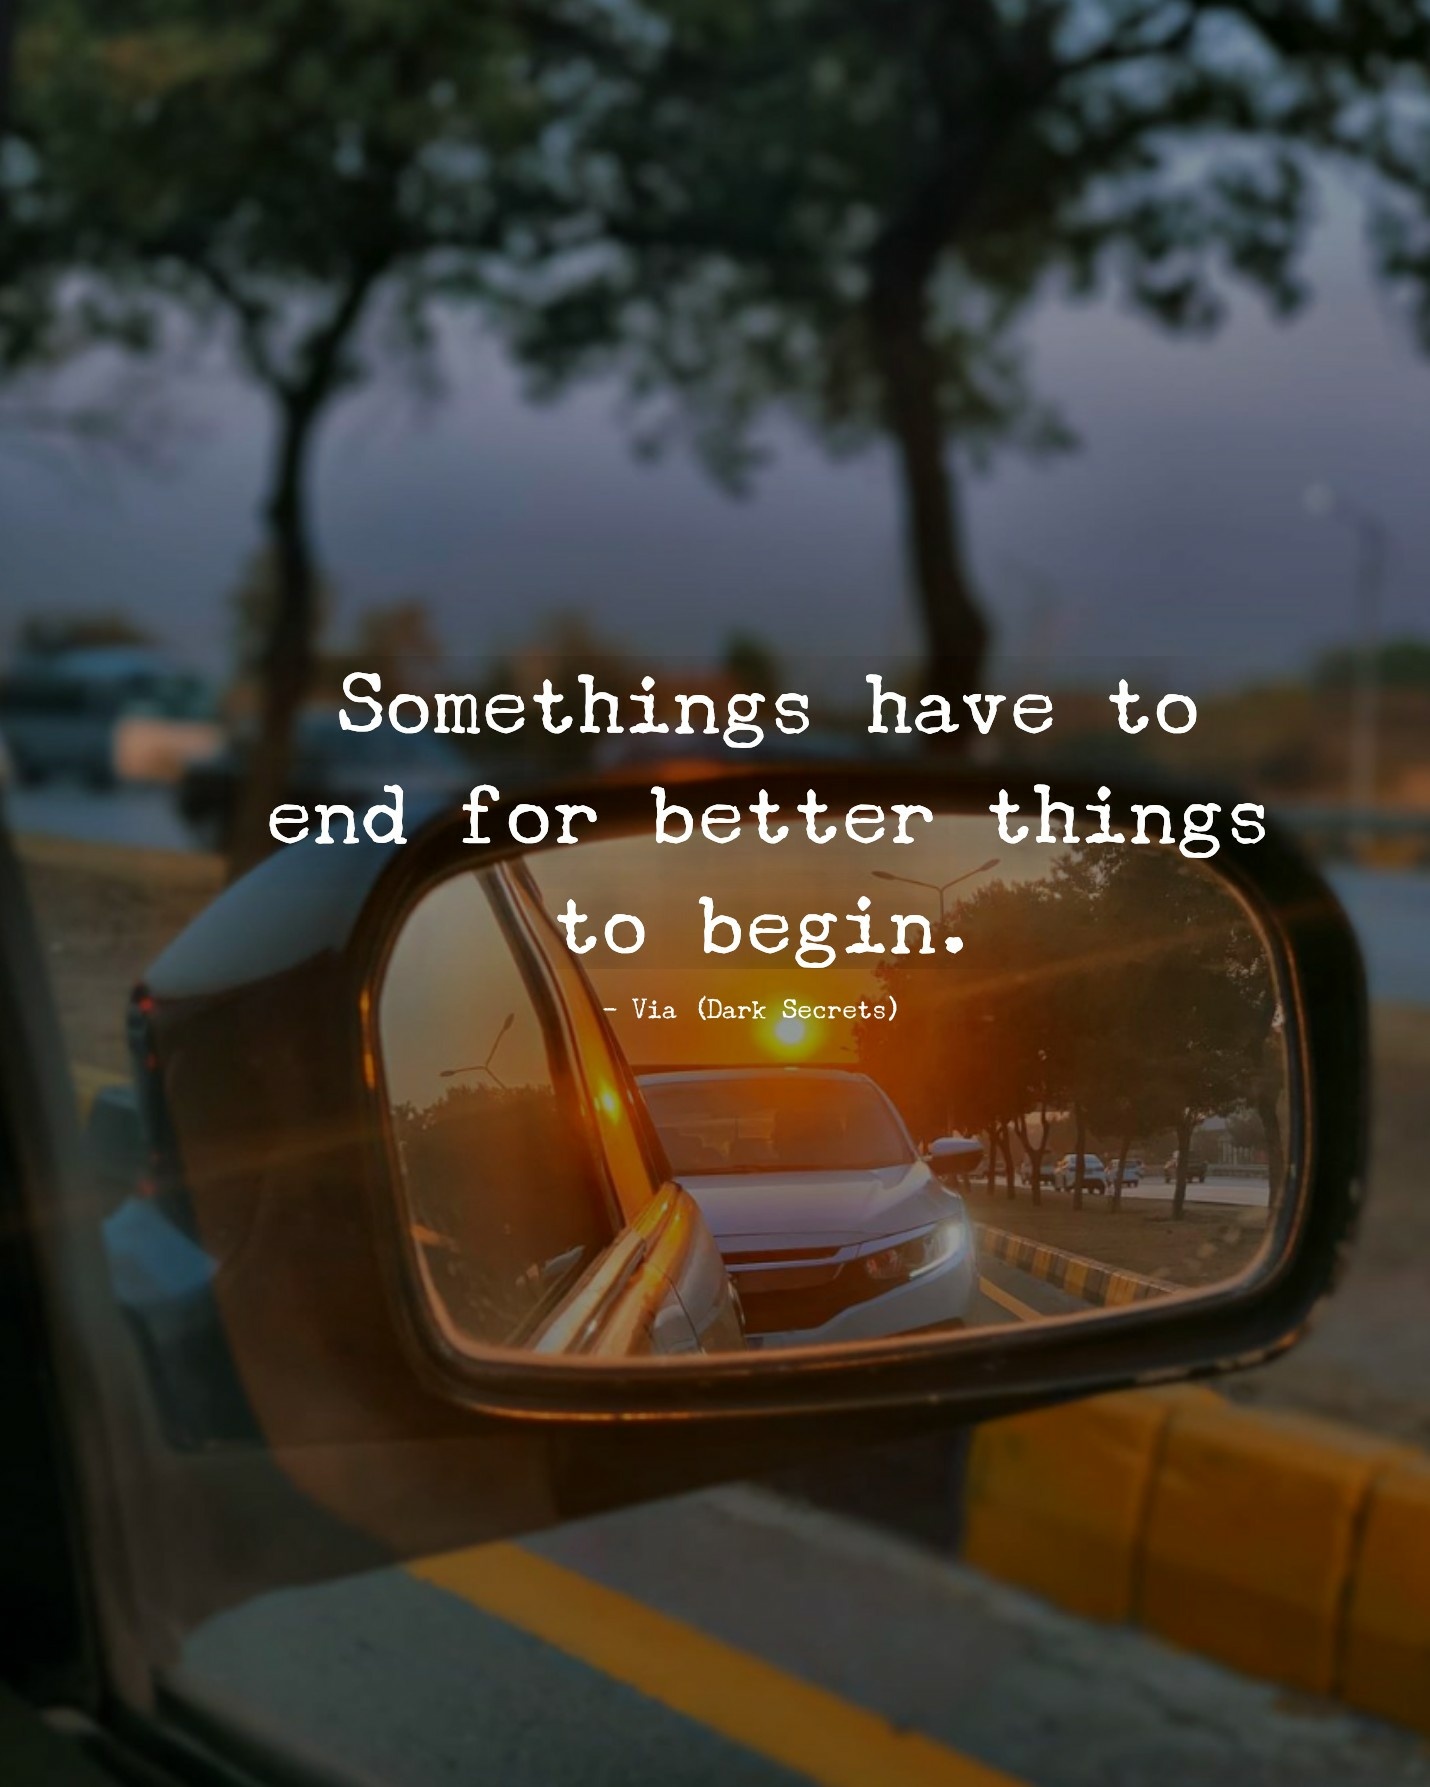 Somethings have to end for better things to begin.